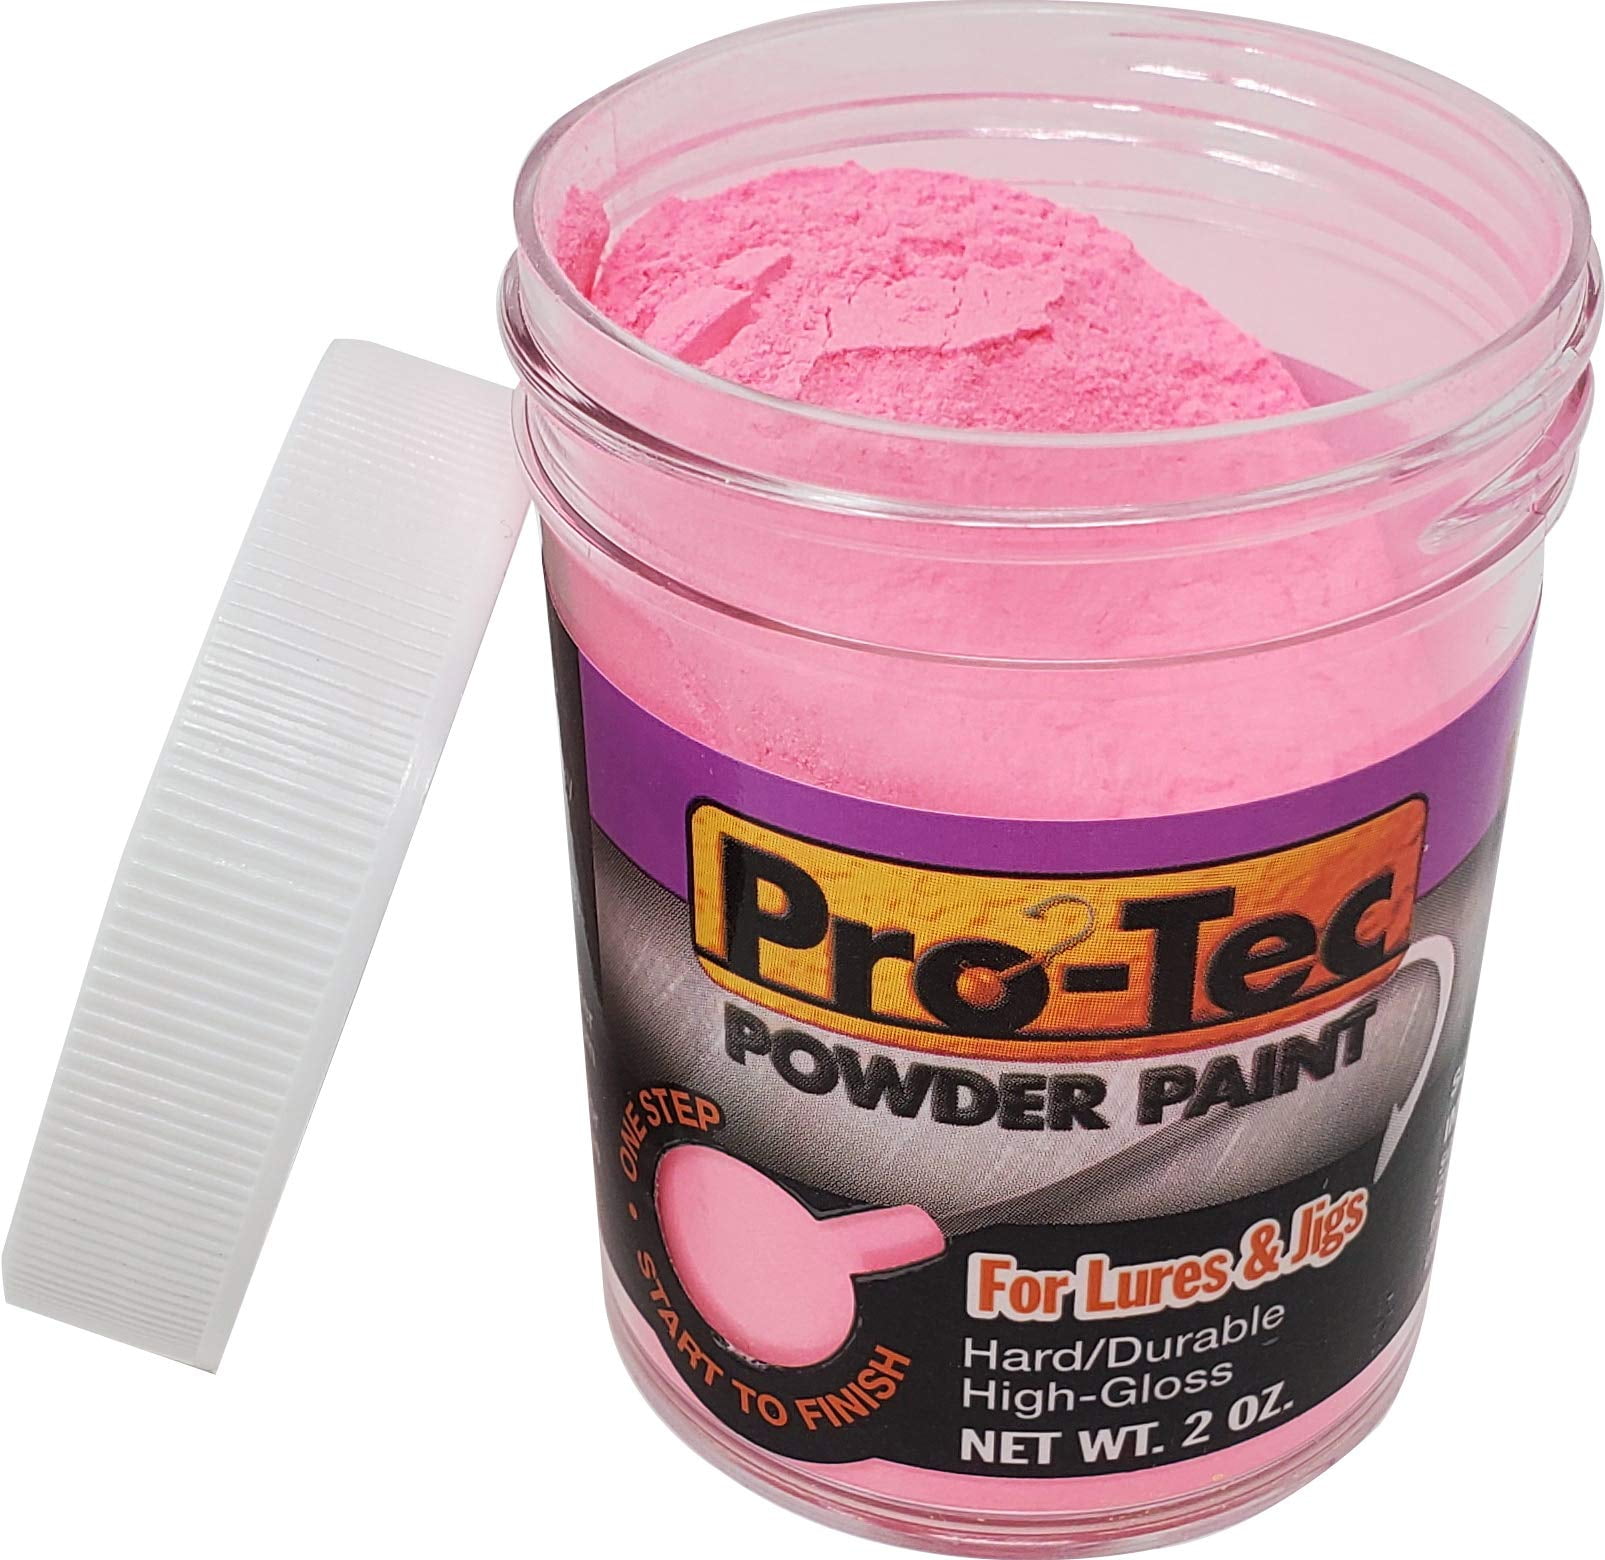 WORLDS 1 JIG PAINT PROTEC POWDER PAINT ALL STANDARD COLORS USA